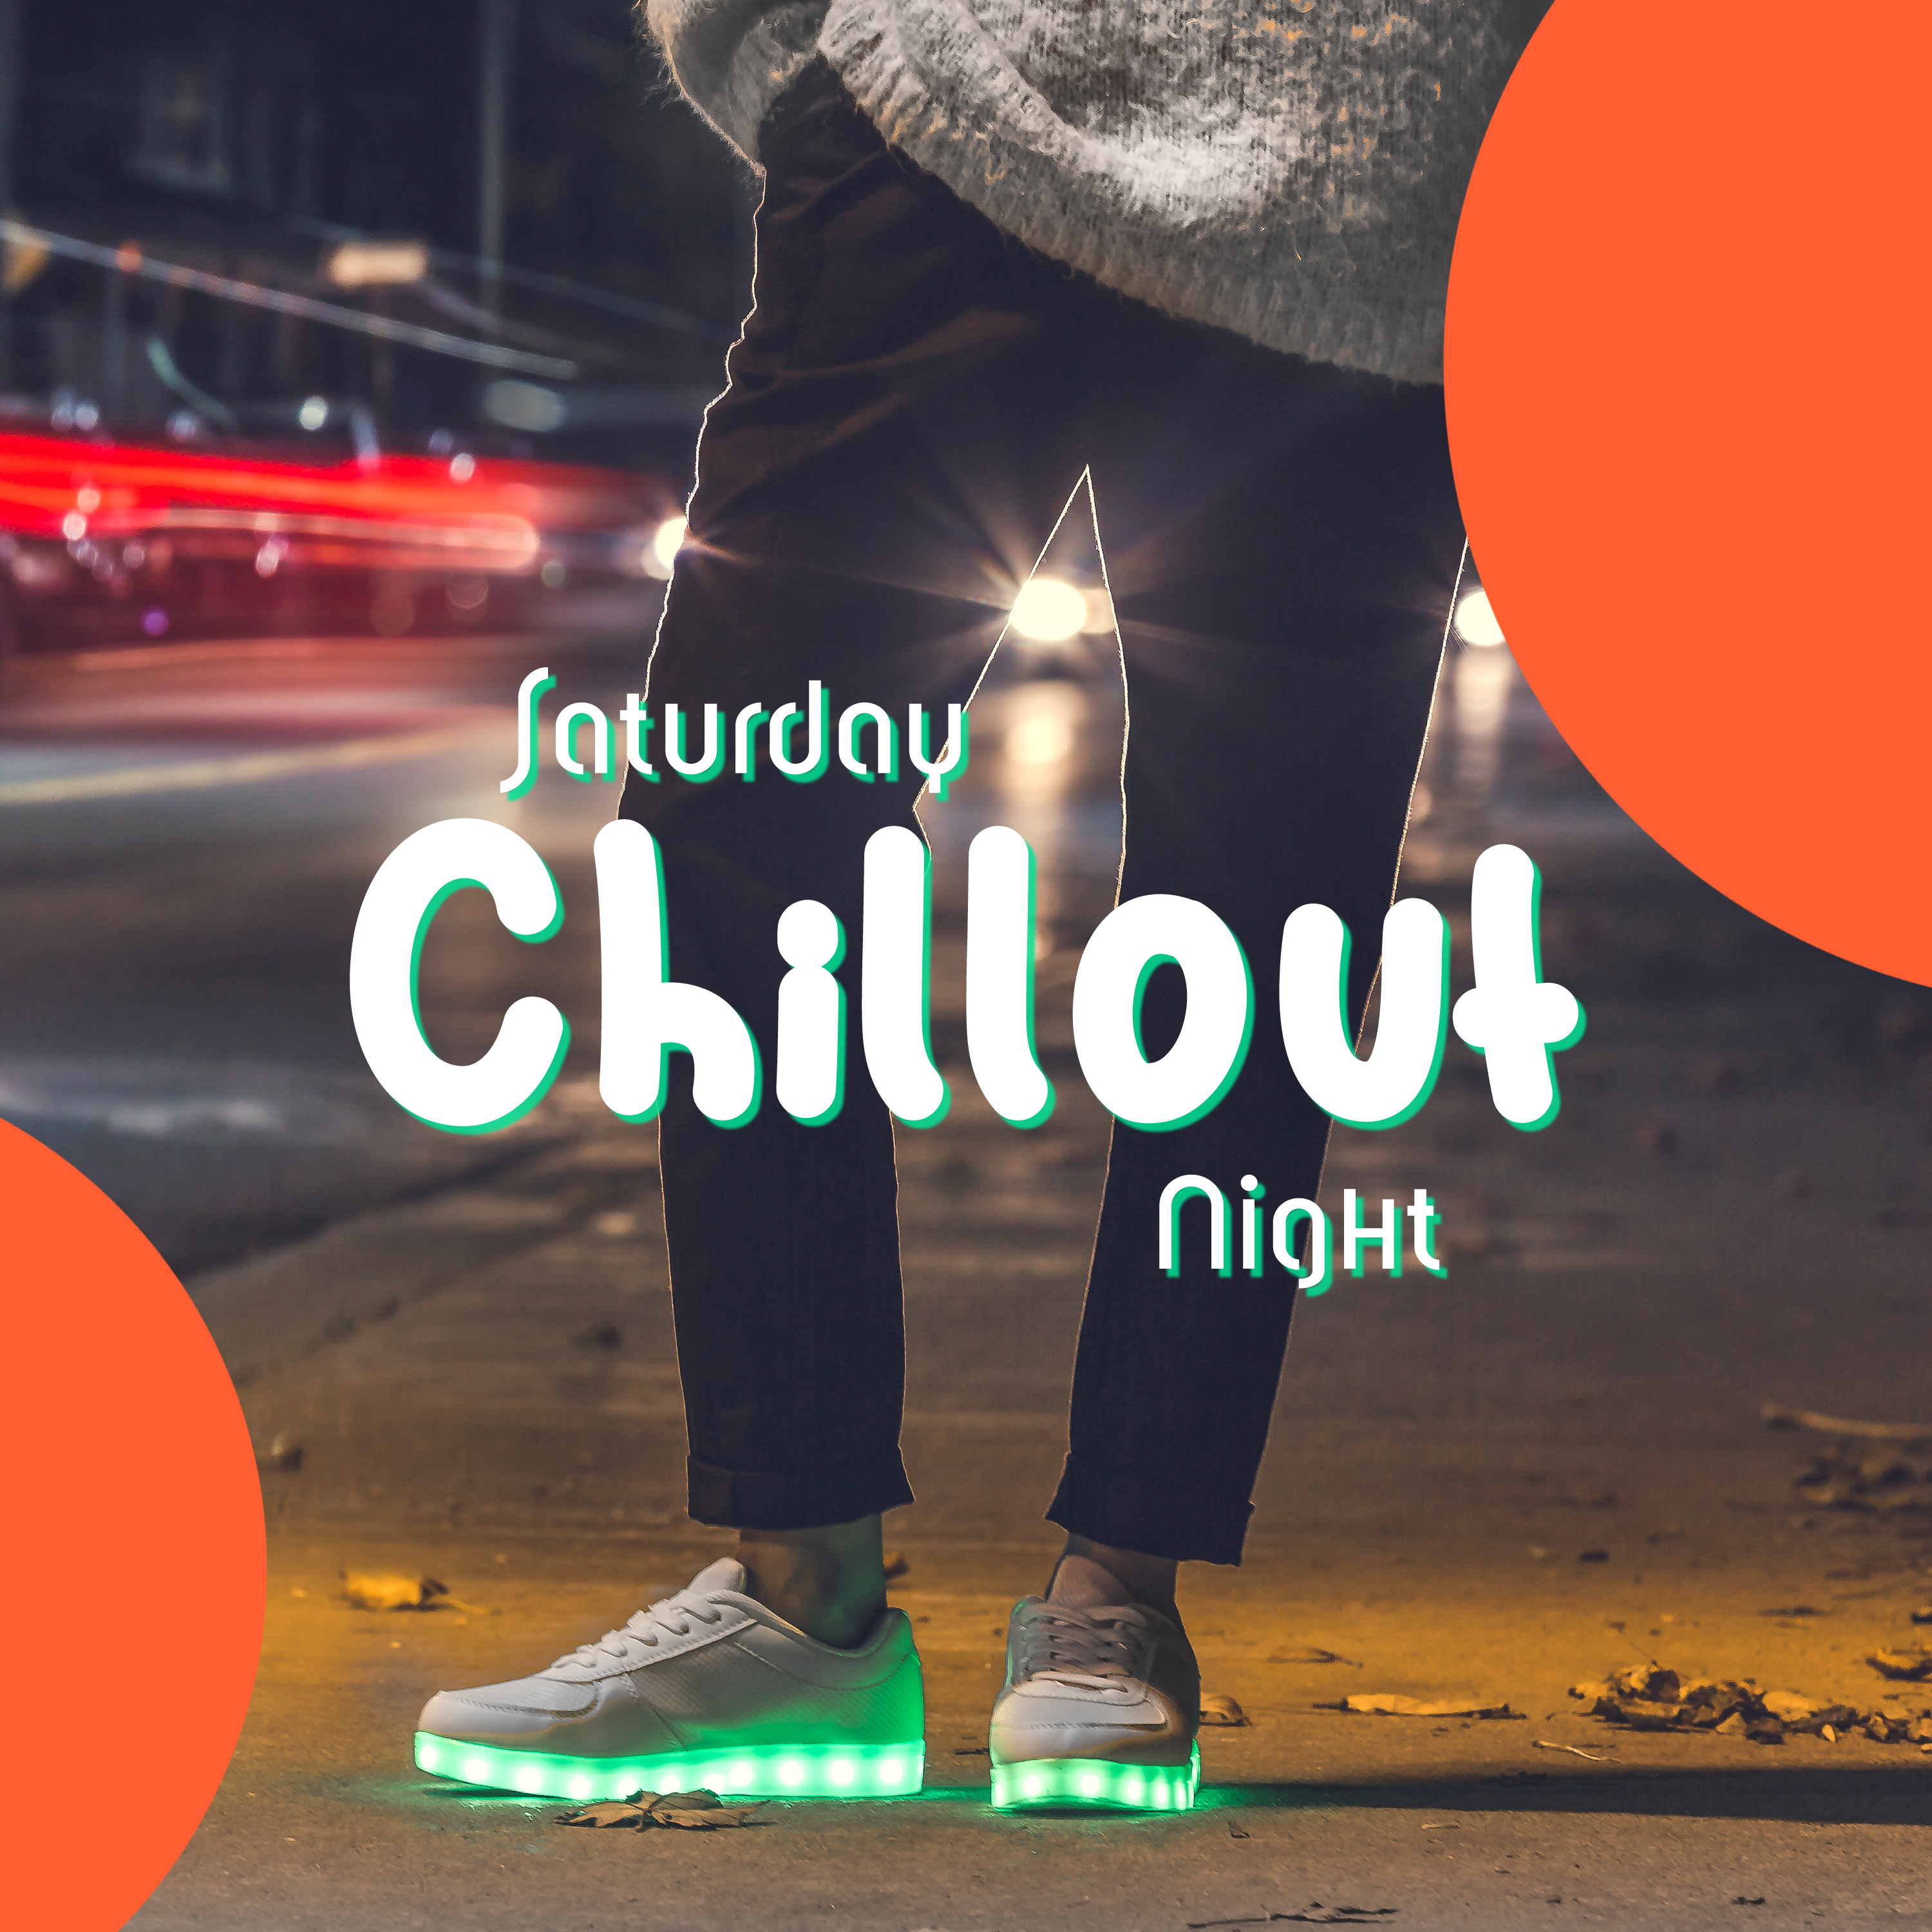 Saturday Chillout Night – Chill Out Music, Party Hits 2017, Dance Music, Lounge, Summer Beats